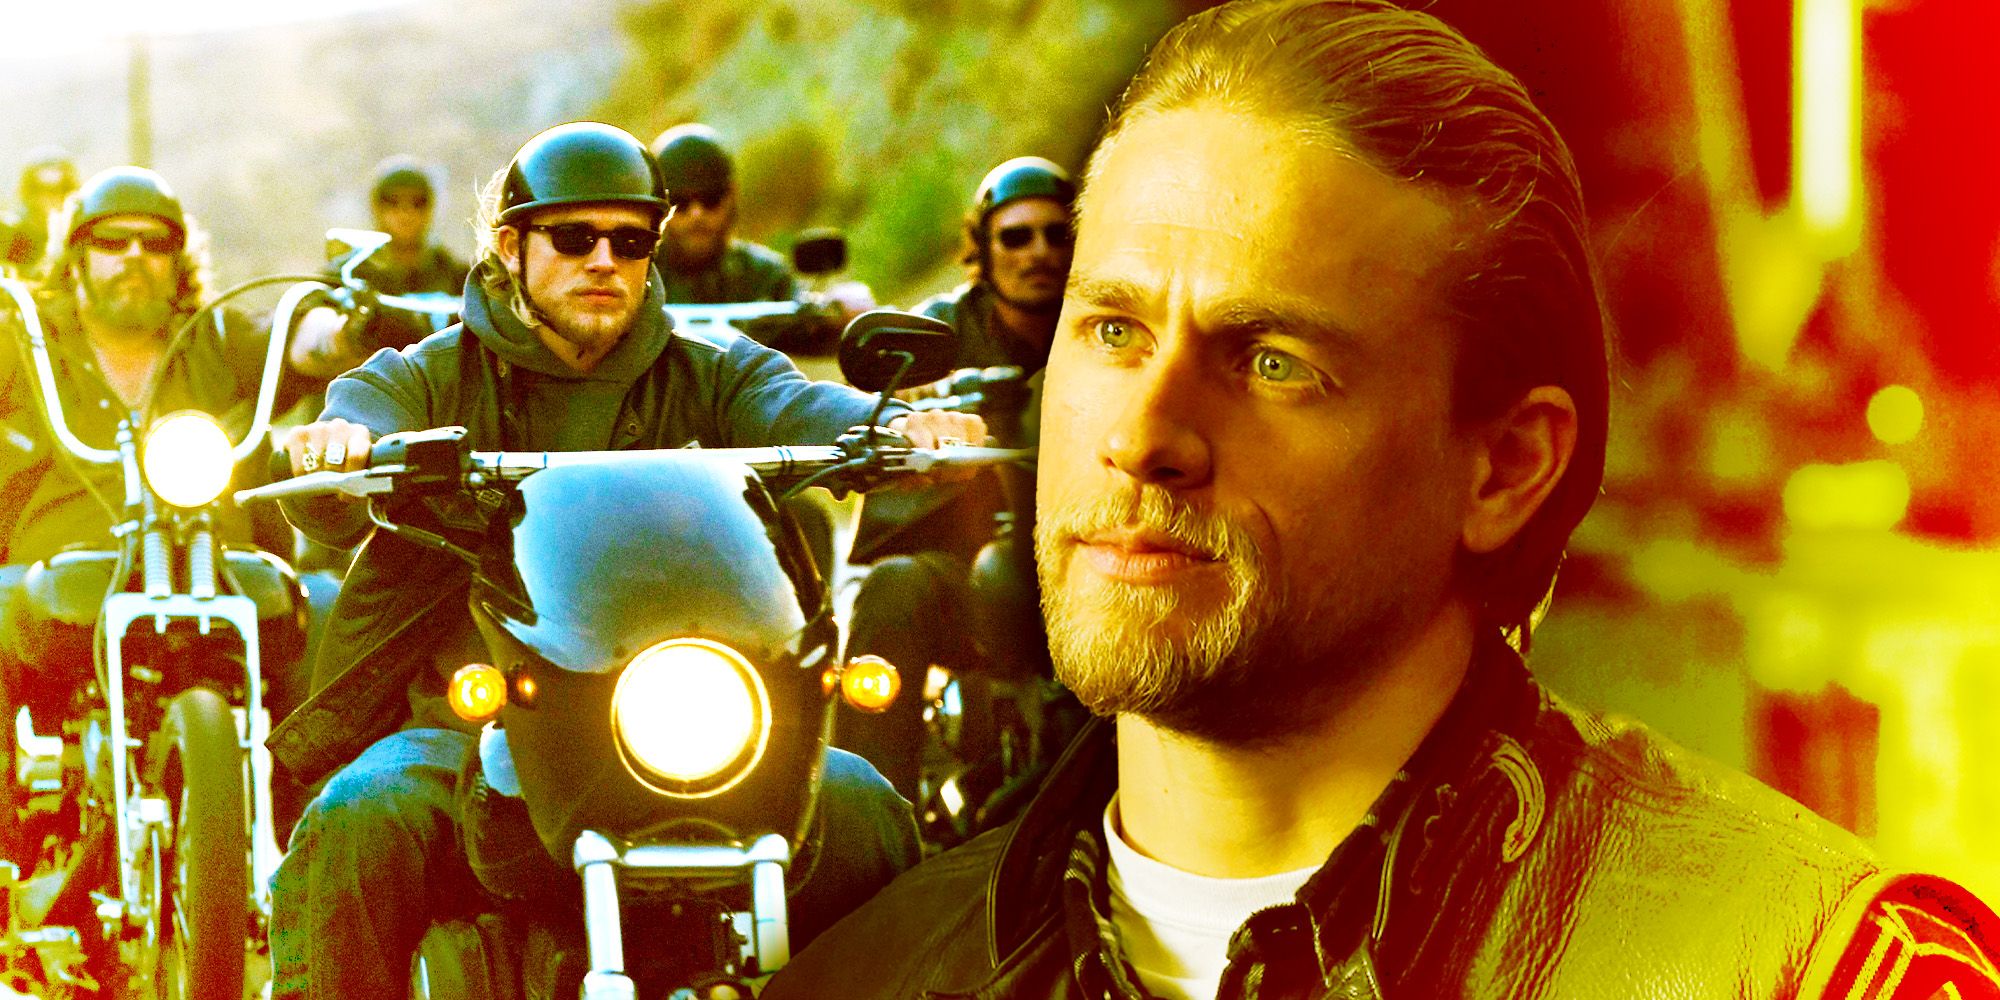 Collage of Charlie Hunnam and the Sons of Anarchy on bikes